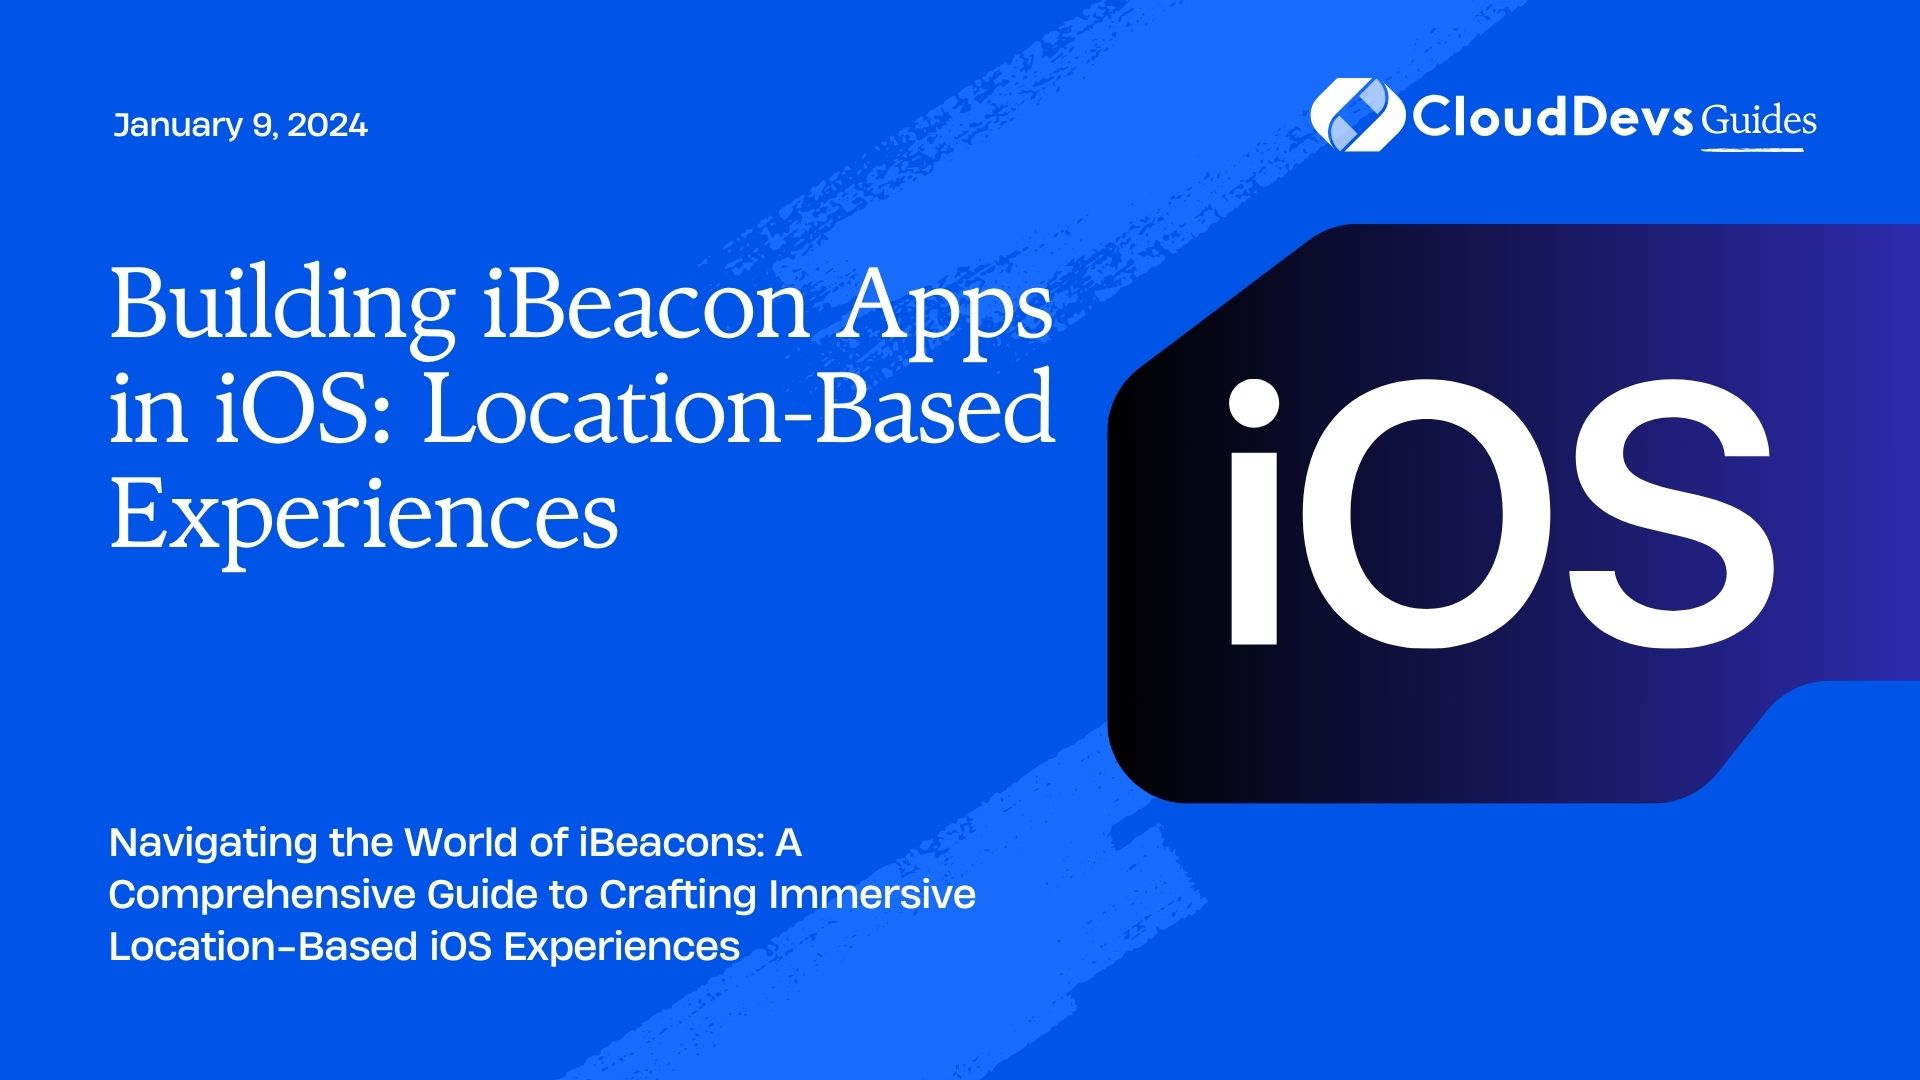 Building iBeacon Apps in iOS: Location-Based Experiences